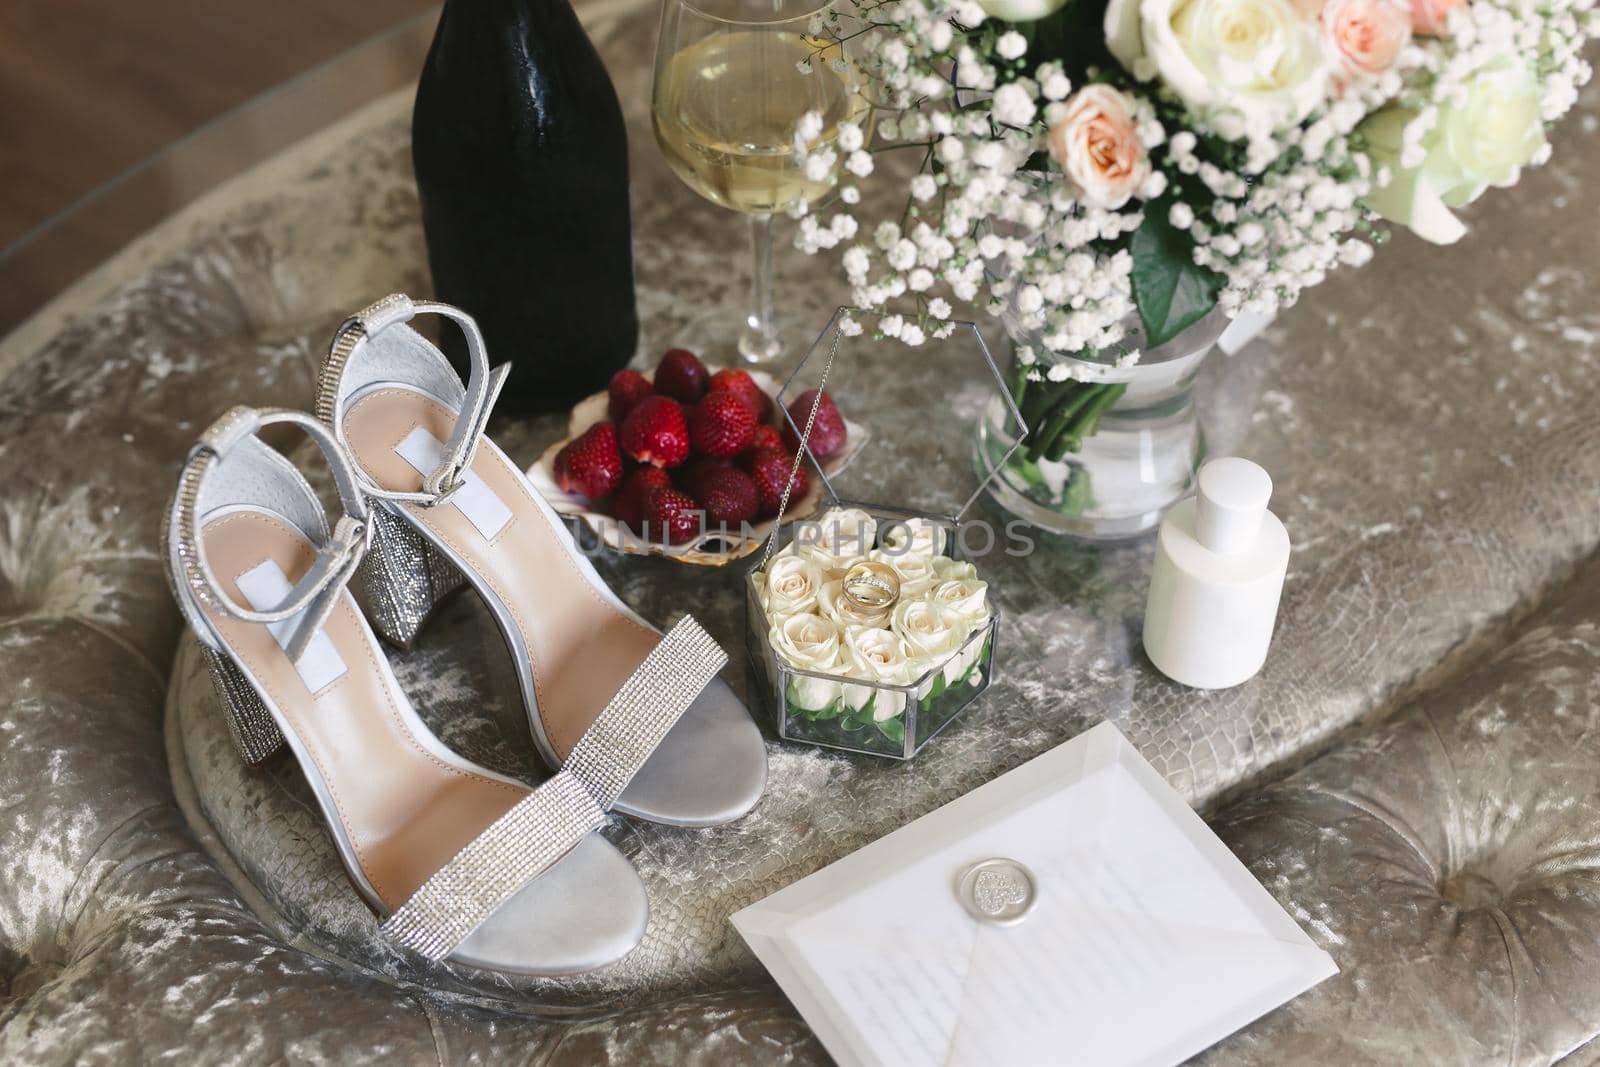 Morning of the bride on the wedding day: shoes, rings, champagne, strawberries and a bouquet.